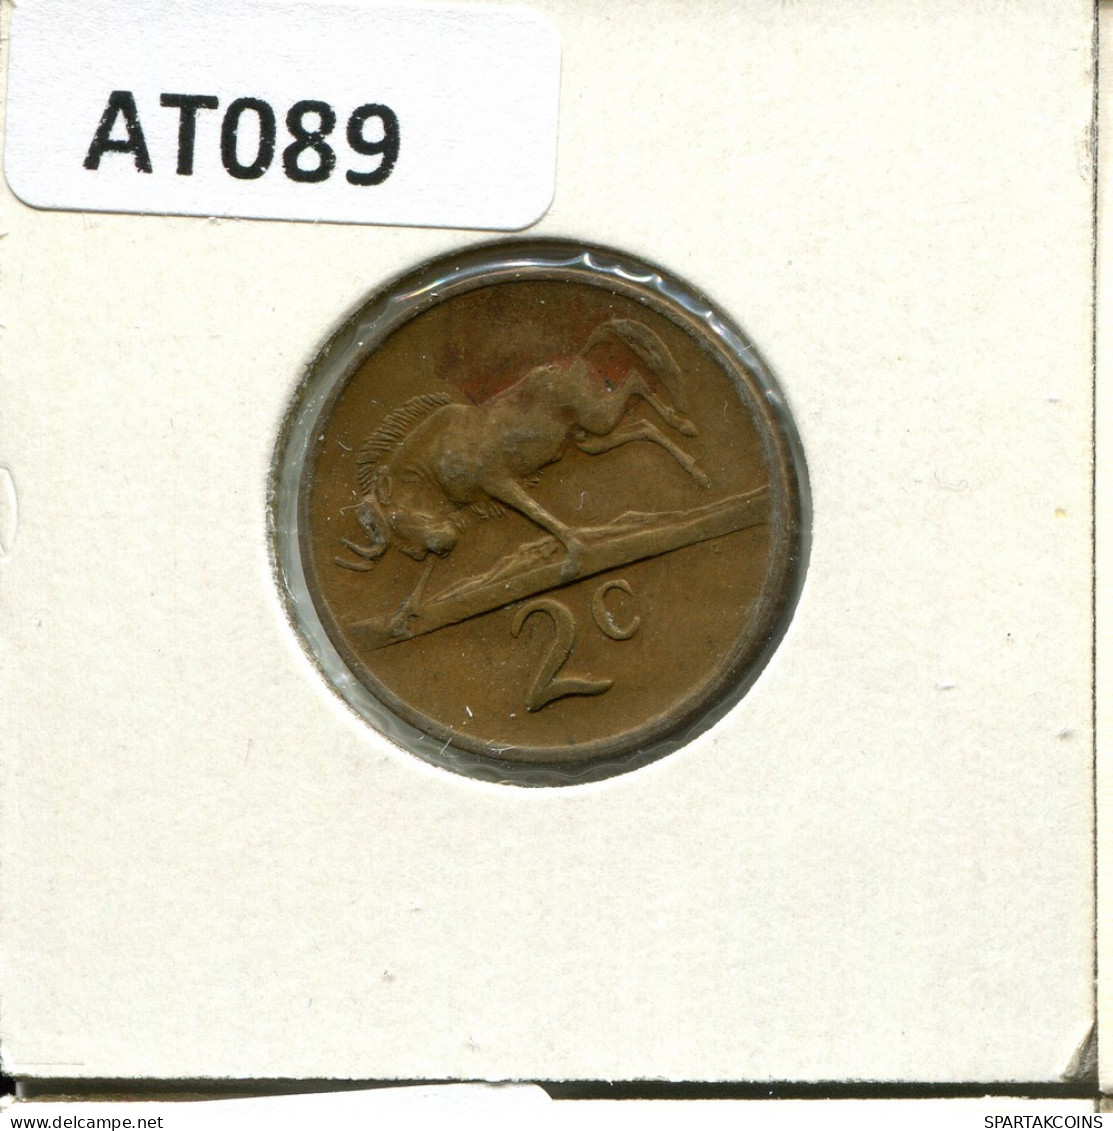 2 CENTS 1974 SÜDAFRIKA SOUTH AFRICA Münze #AT089.D.A - Sud Africa